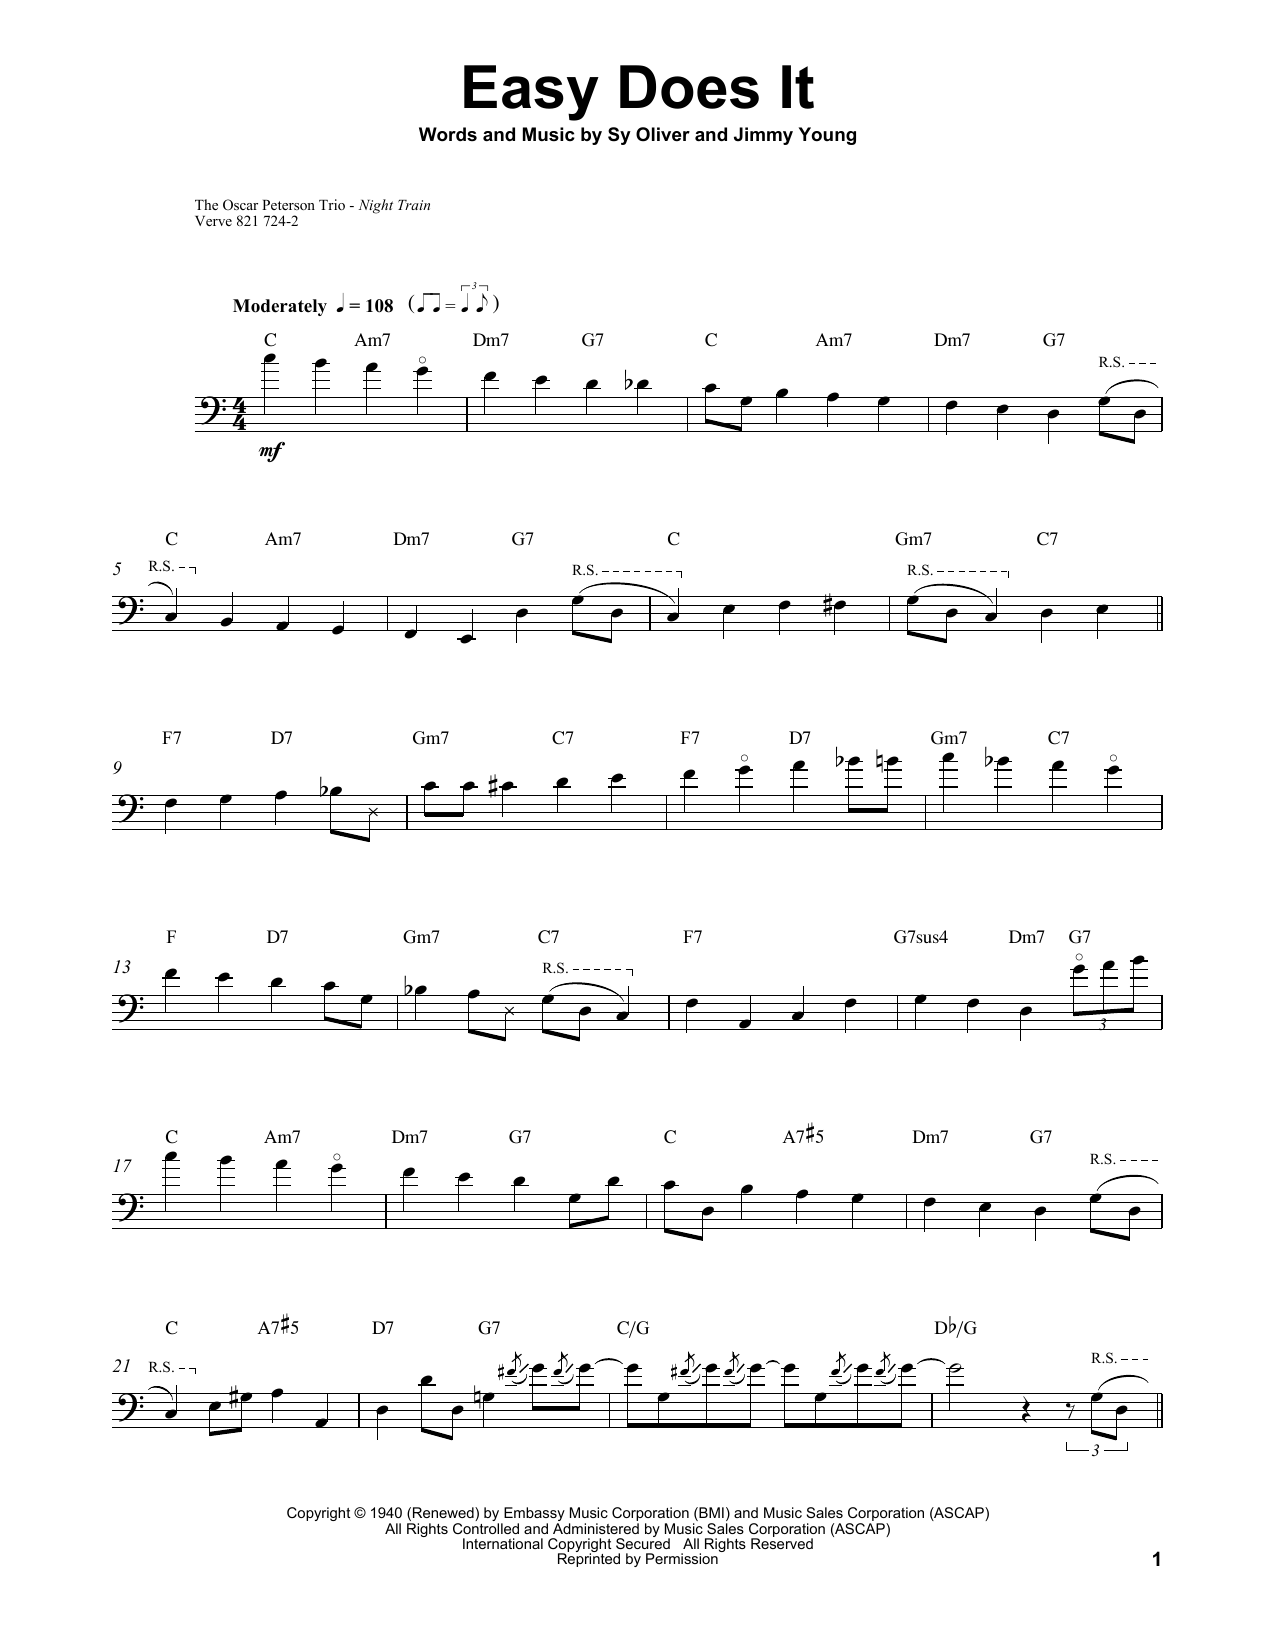 Ray Brown Easy Does It sheet music notes printable PDF score